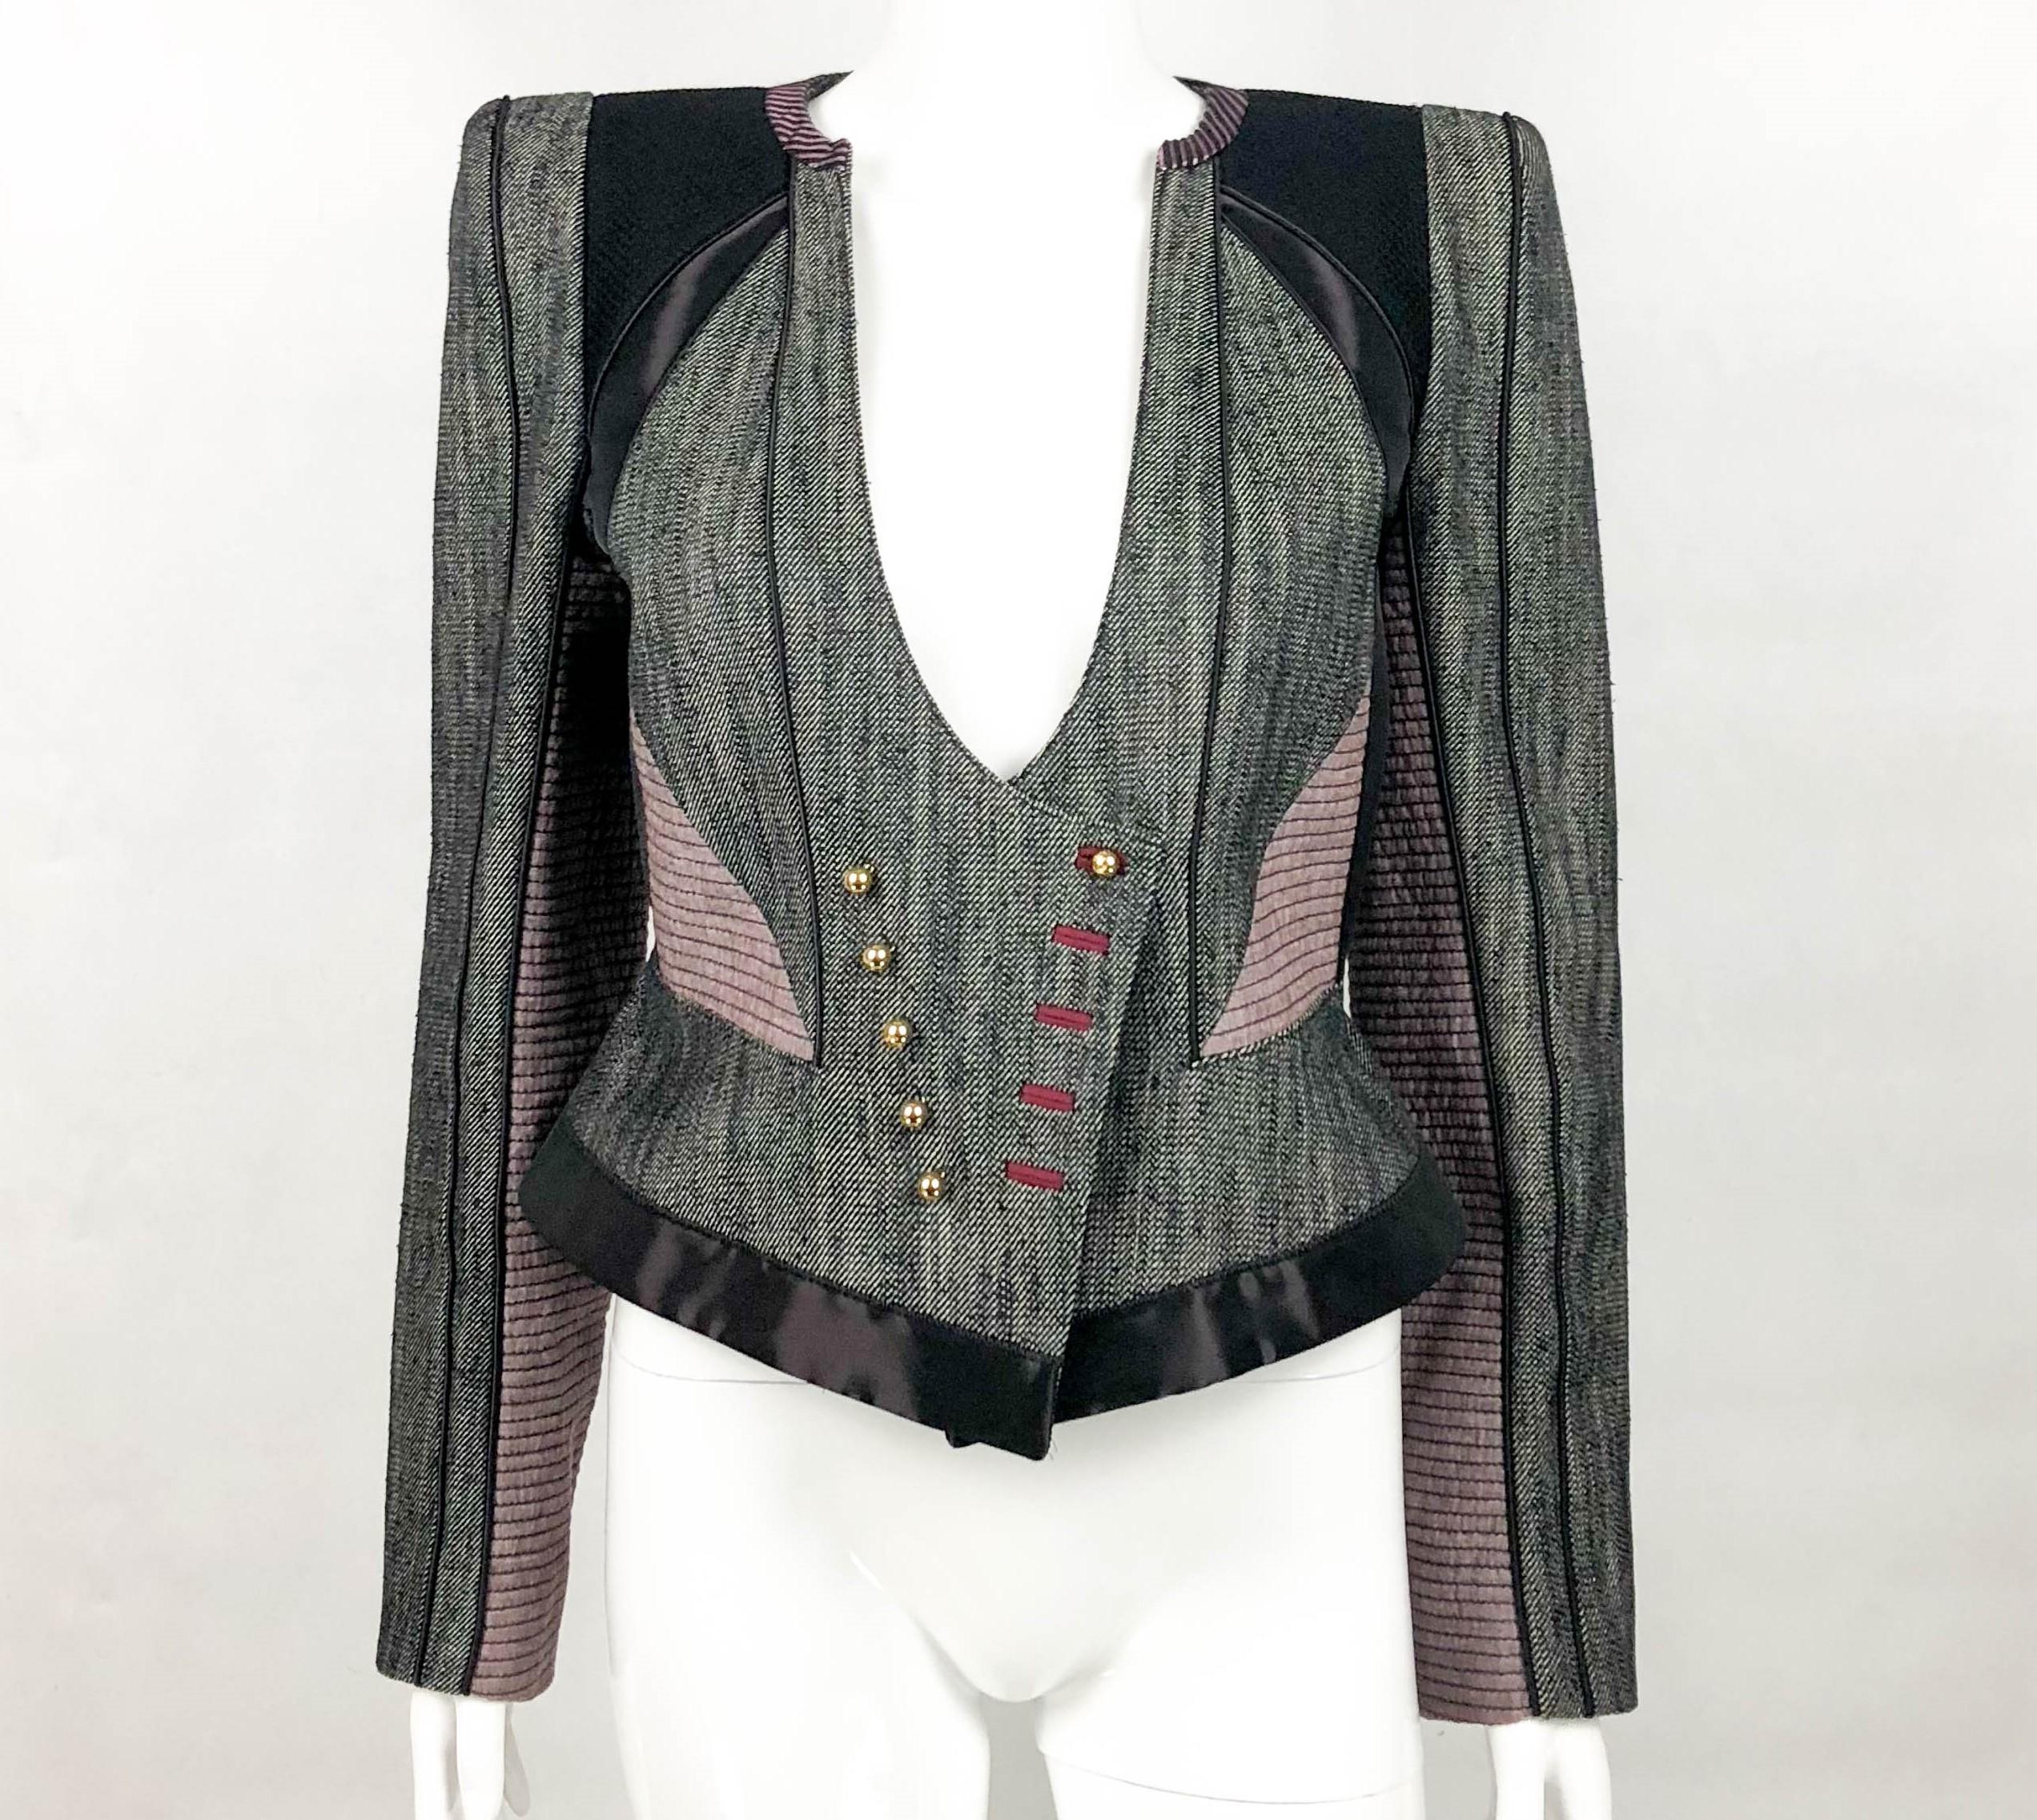 2009 Louis Vuitton Runway Piece Futuristic Jacket In Excellent Condition For Sale In London, Chelsea